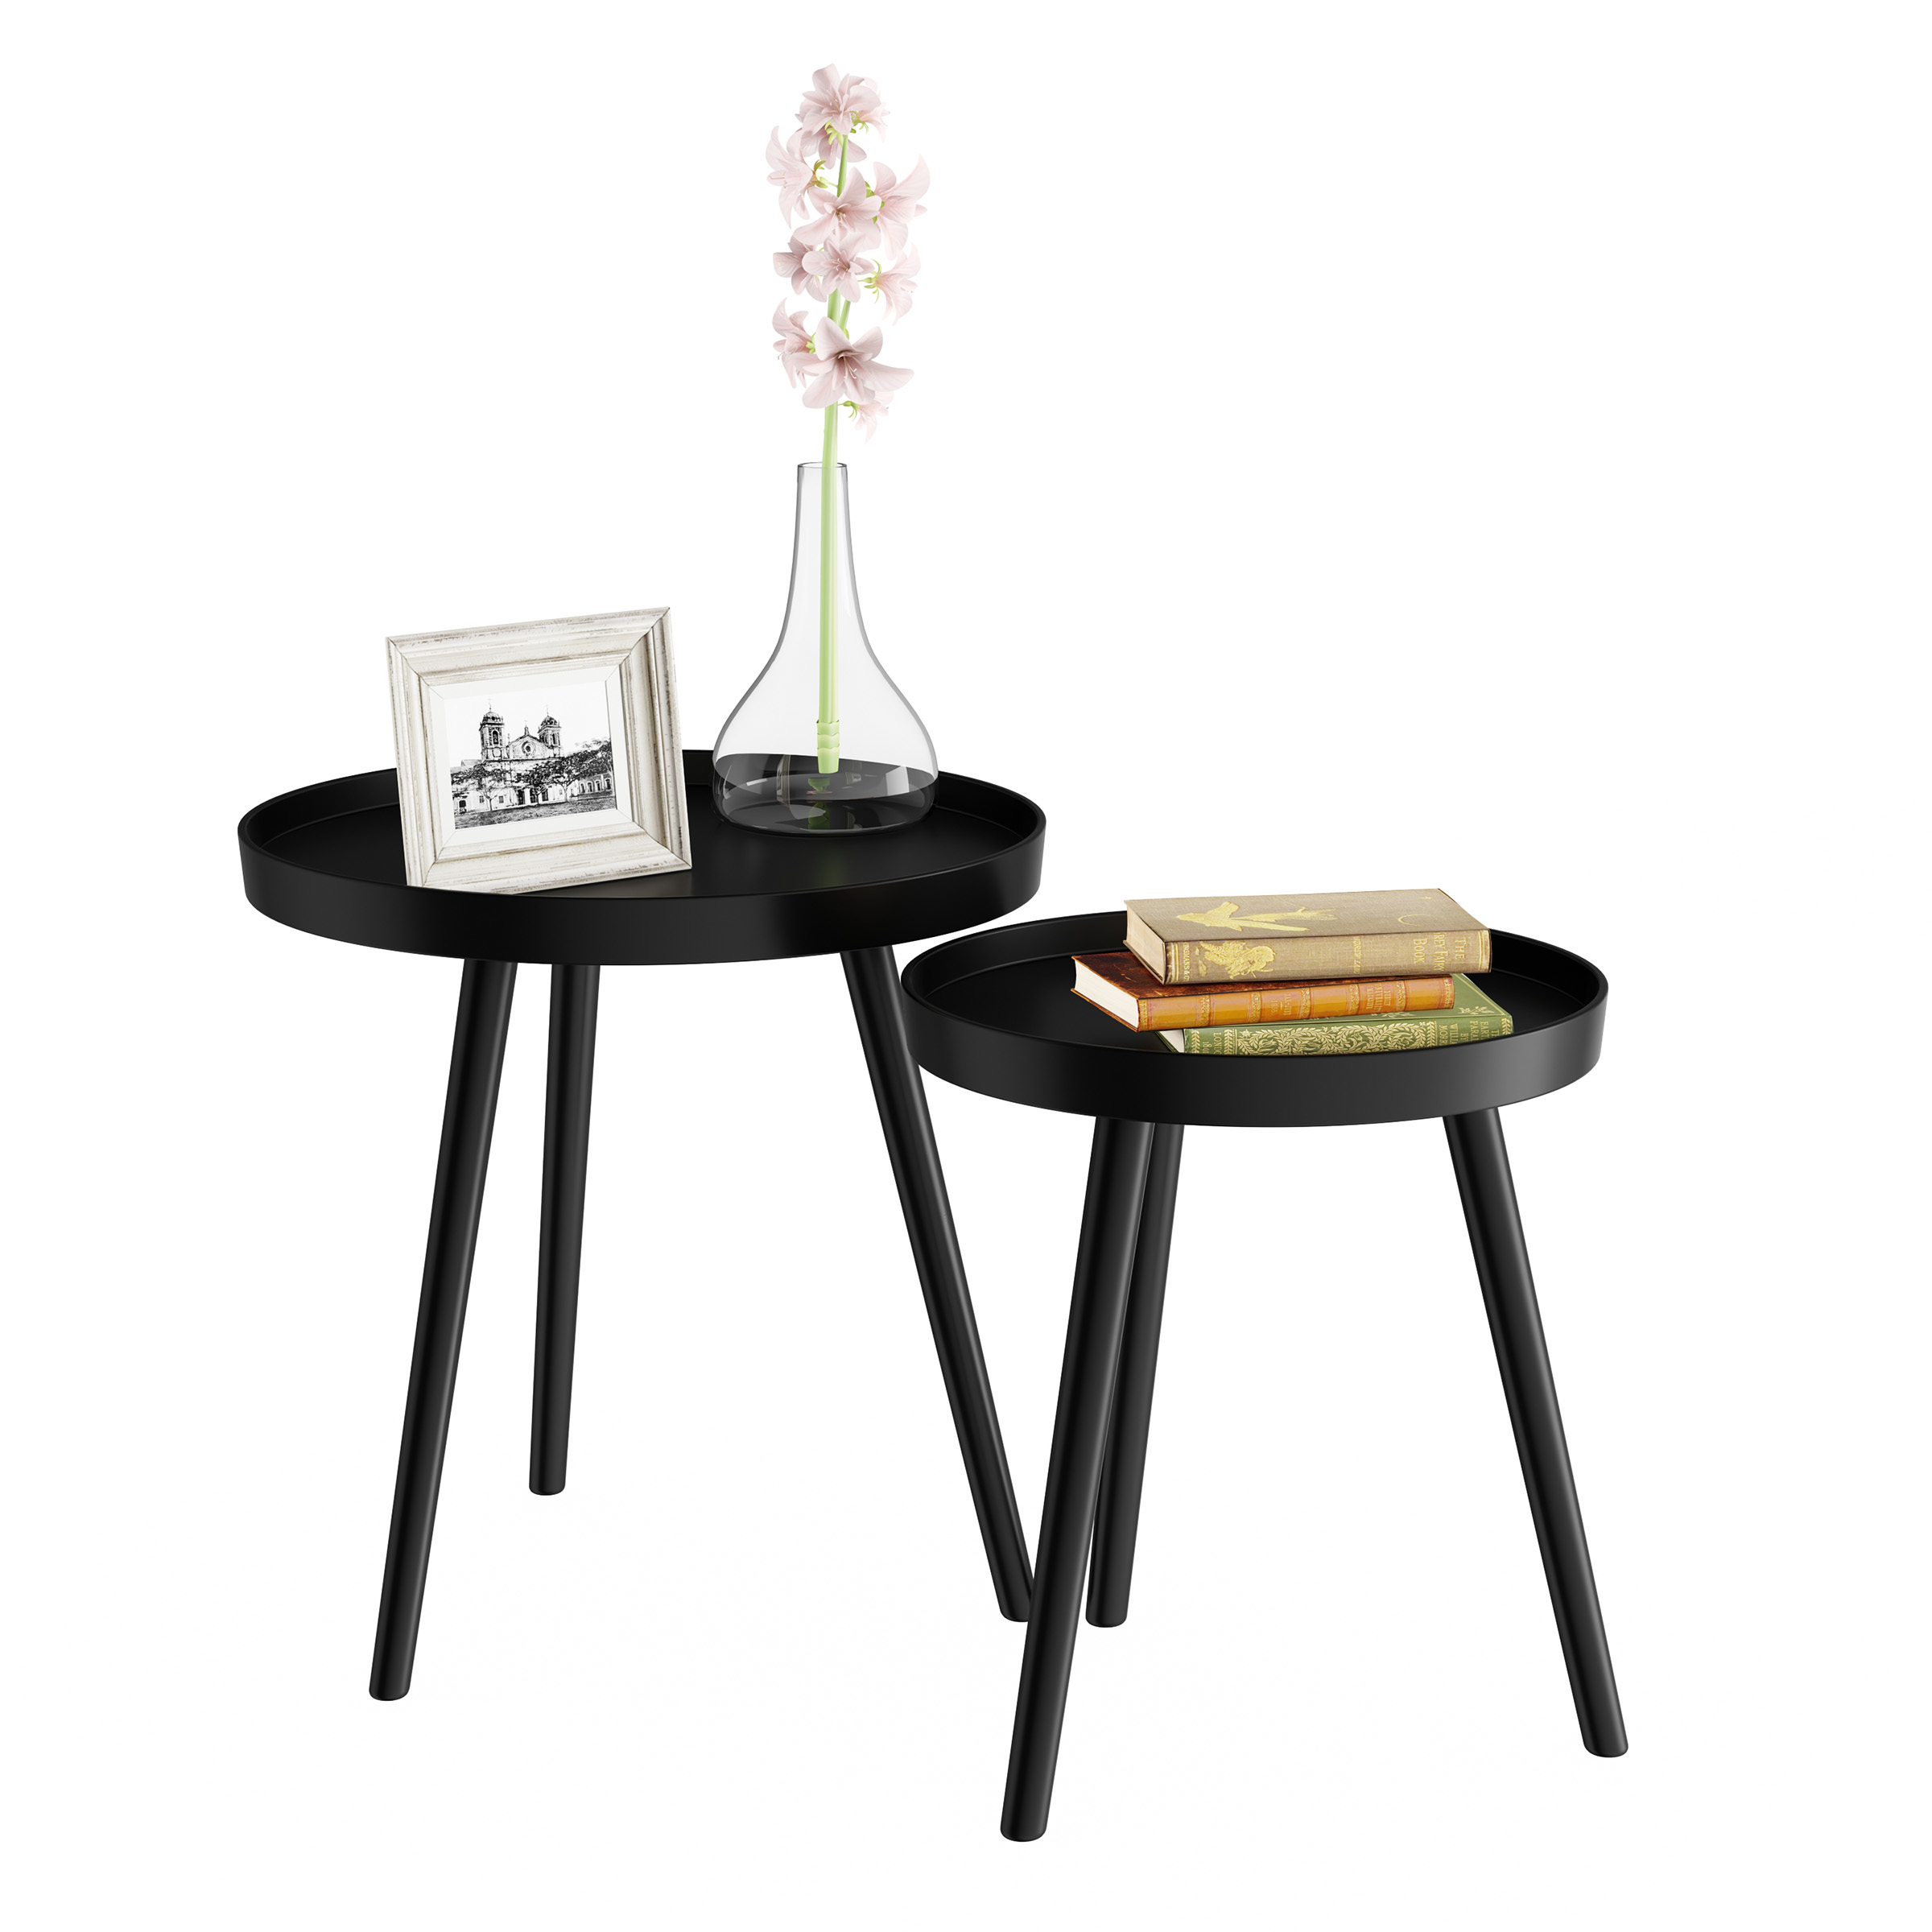 Set Of 2 Round Nesting Tables Rimmed End Tables Home Decor Night Stands Accent Tables - Black